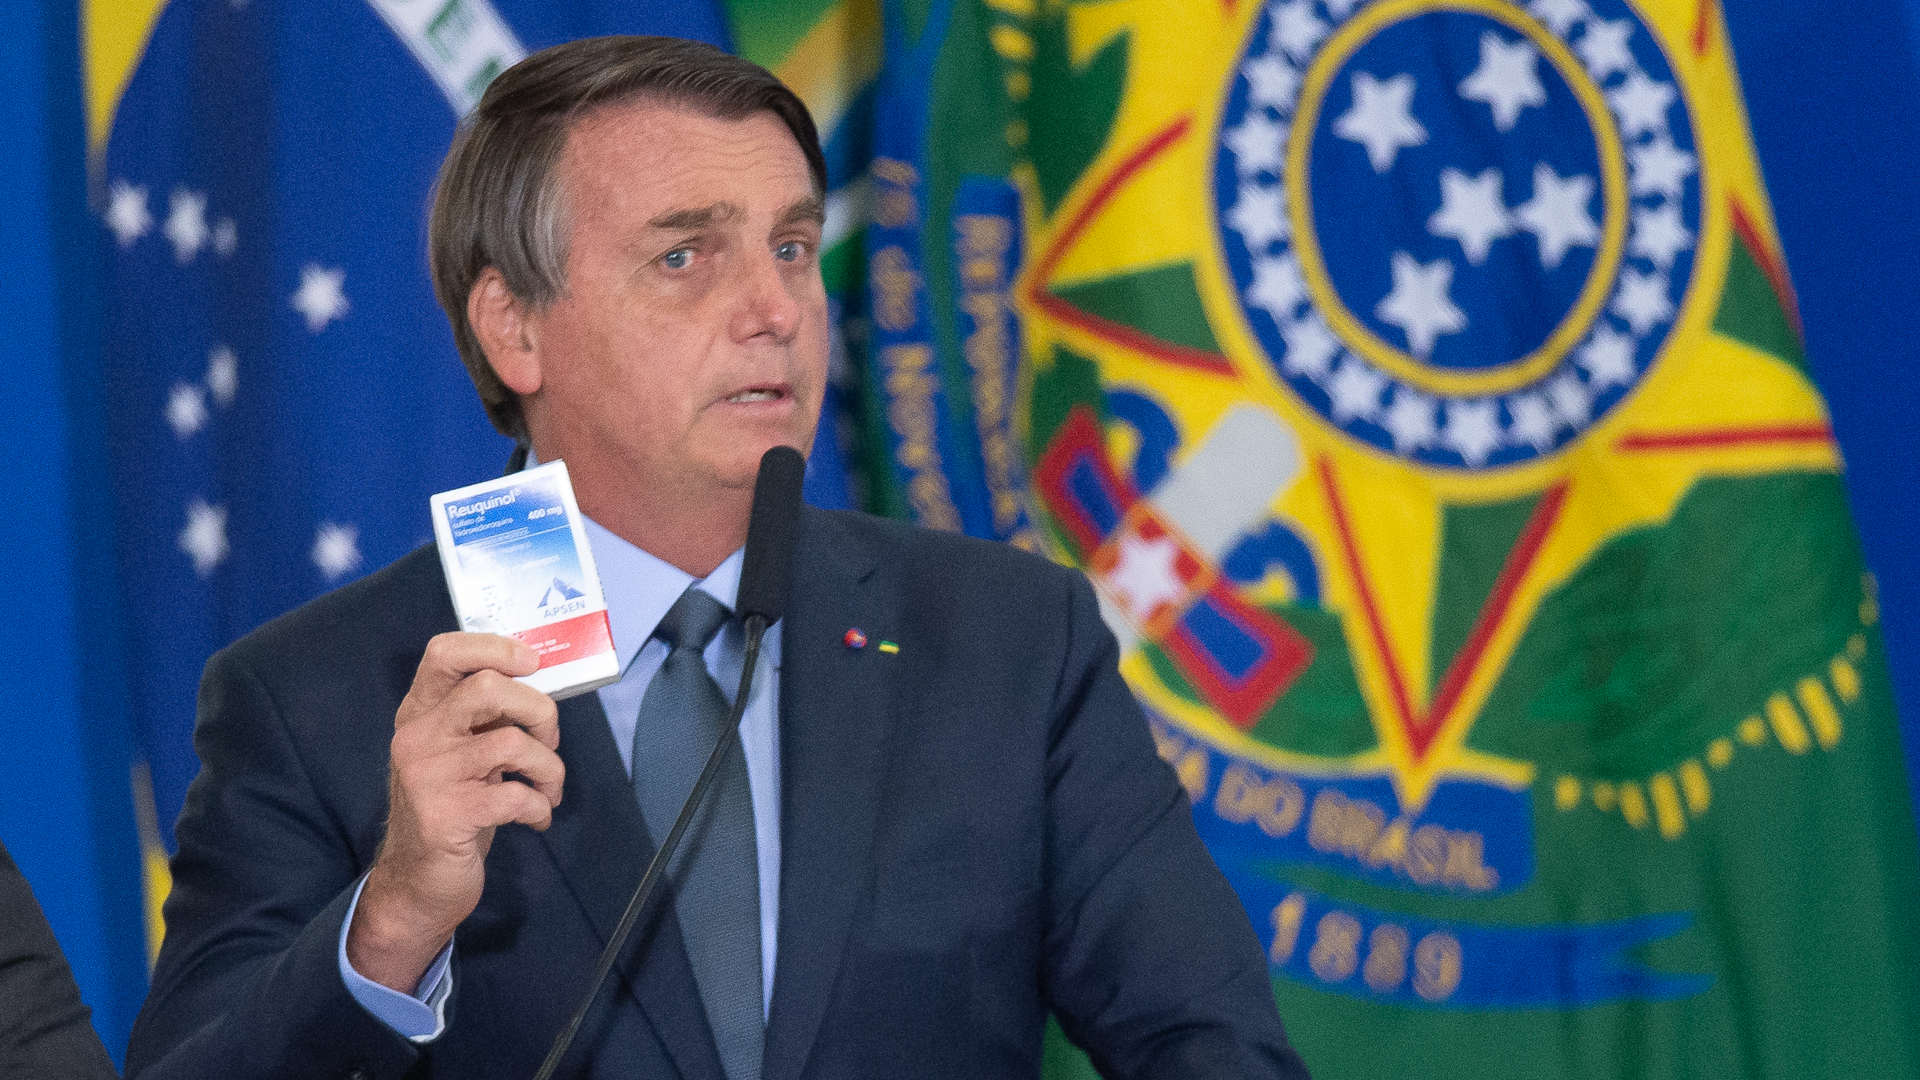 President of Brazil Jair Bolsonaro holds up a box of hydroxychloroquine during a ceremony in which Eduardo Pazuello took office as Minister of Health on Sept. 16, 2020.